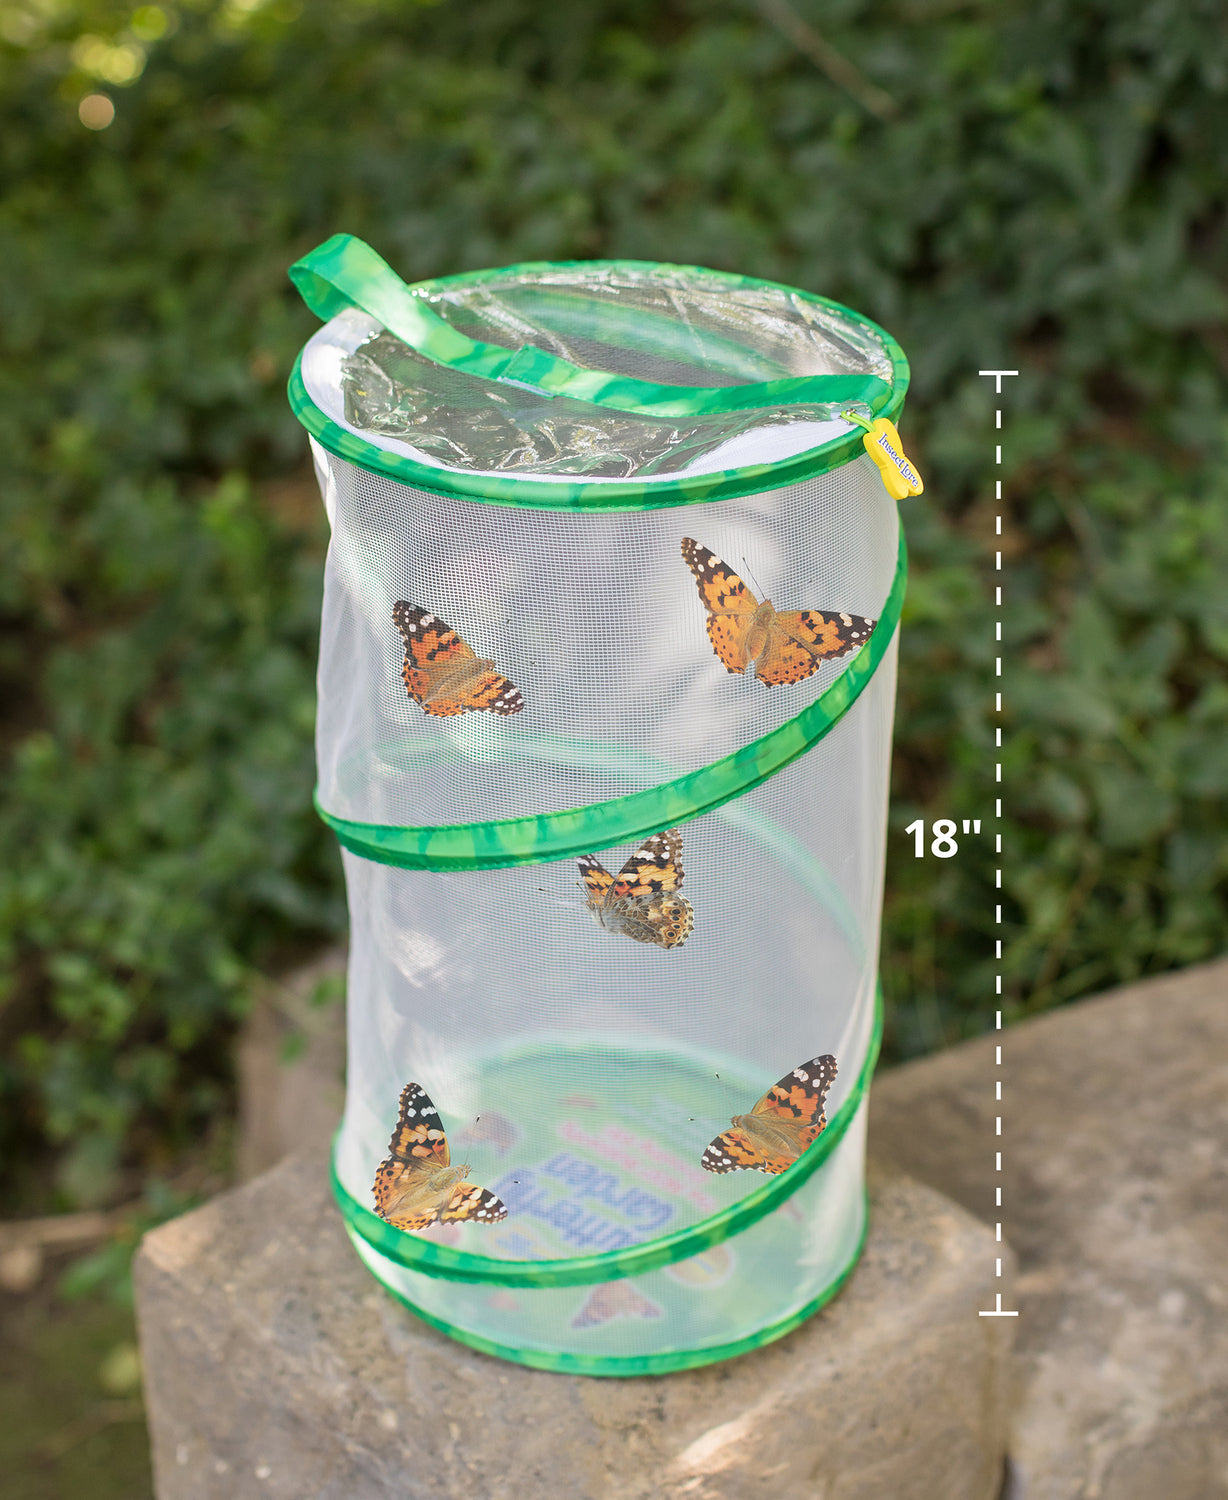 Giant Butterfly Garden with Life Cycle Figurines